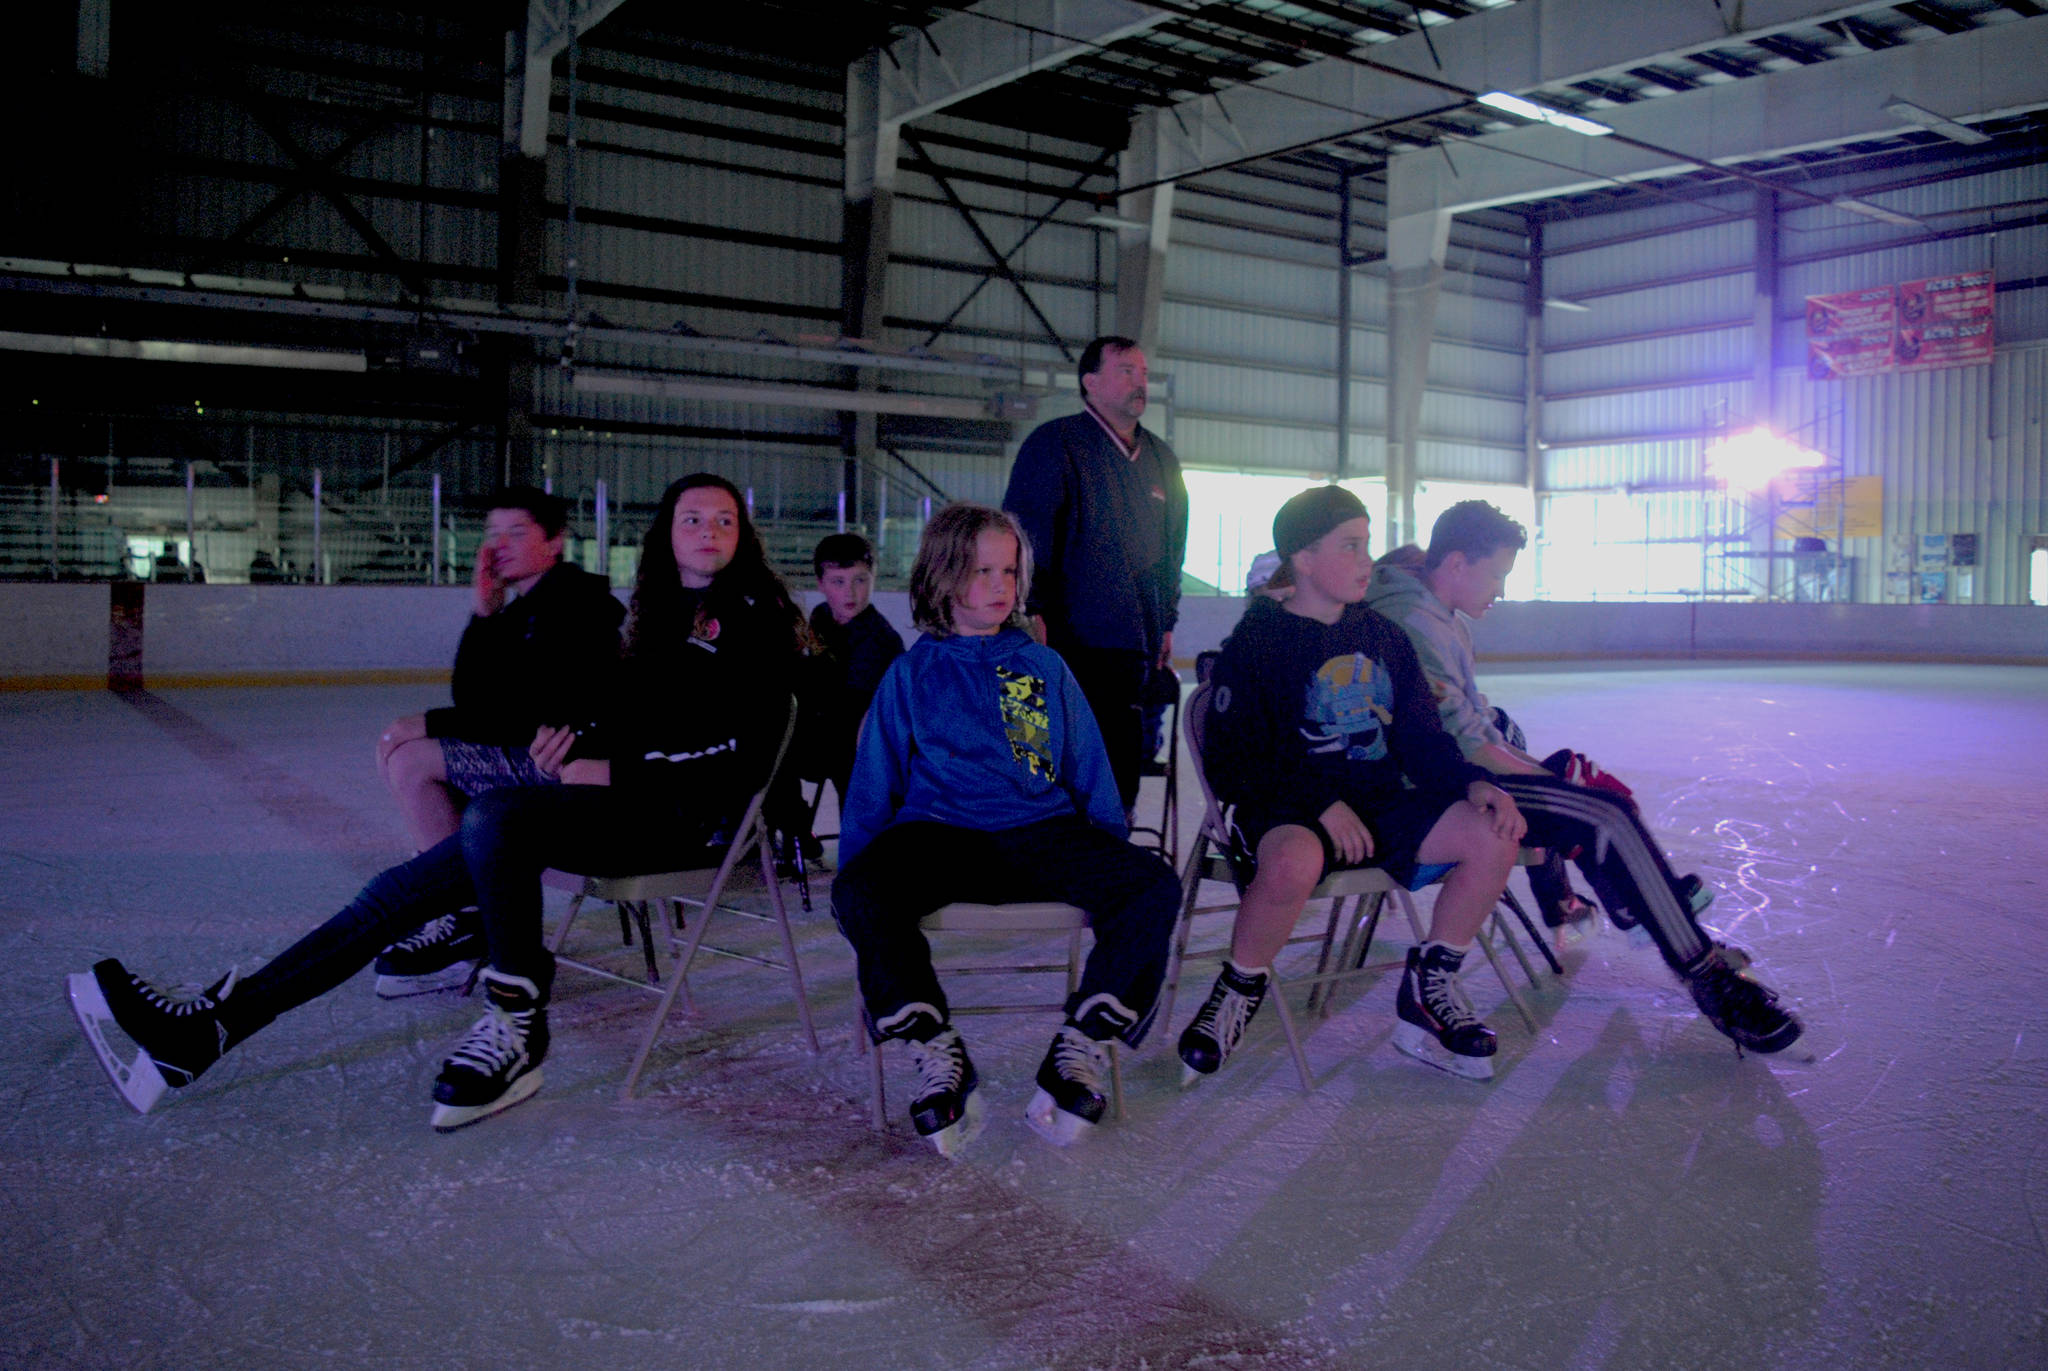 Event organizer Vince Redford, standing, and participants of Friday Night Lights at the ConocoPhillips Kenai Multipurpose Facility in Kenai keep their eyes on the music booth during a game of musical chairs on June 16. The weekly event runs from 8 p.m. to 10 p.m. and offers a wide variety of games played on the ice. (Photo by Kat Sorensen/Peninsula Clarion)